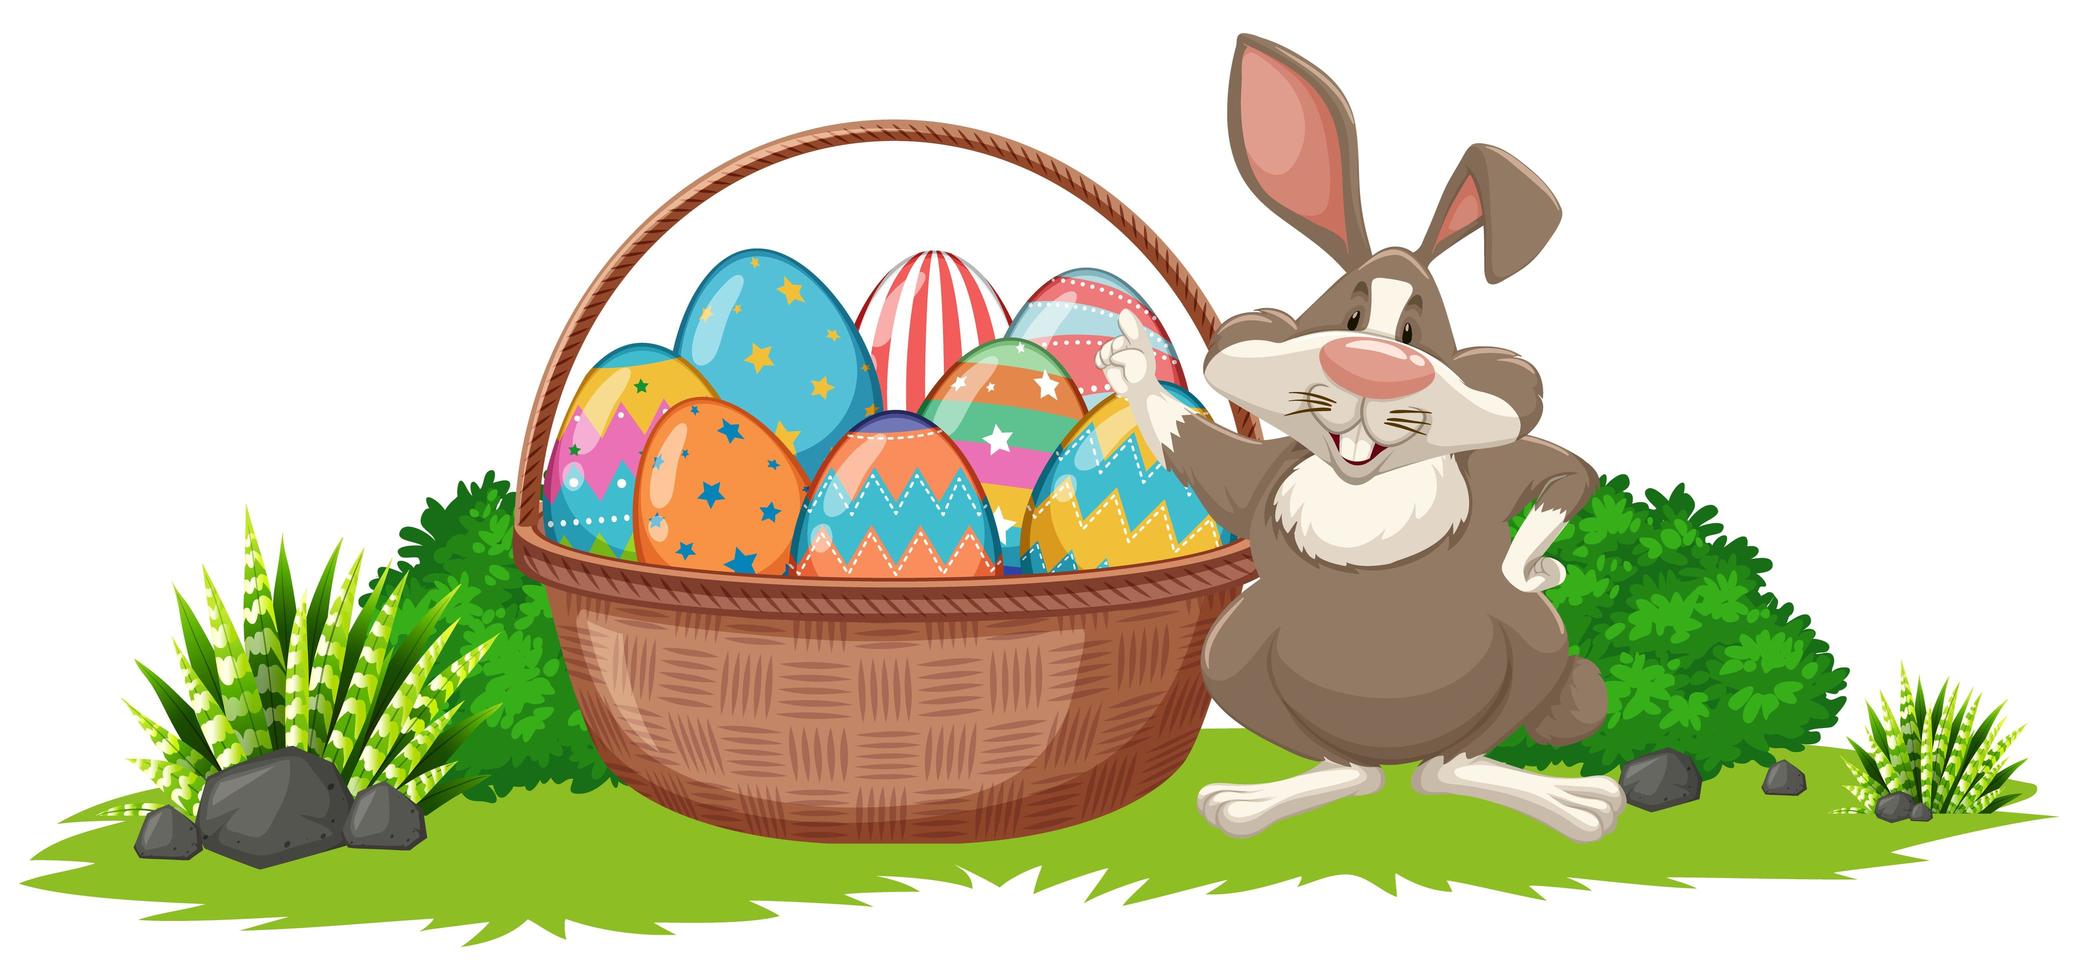 Easter Background with Rabbit and Basket Full of Eggs vector